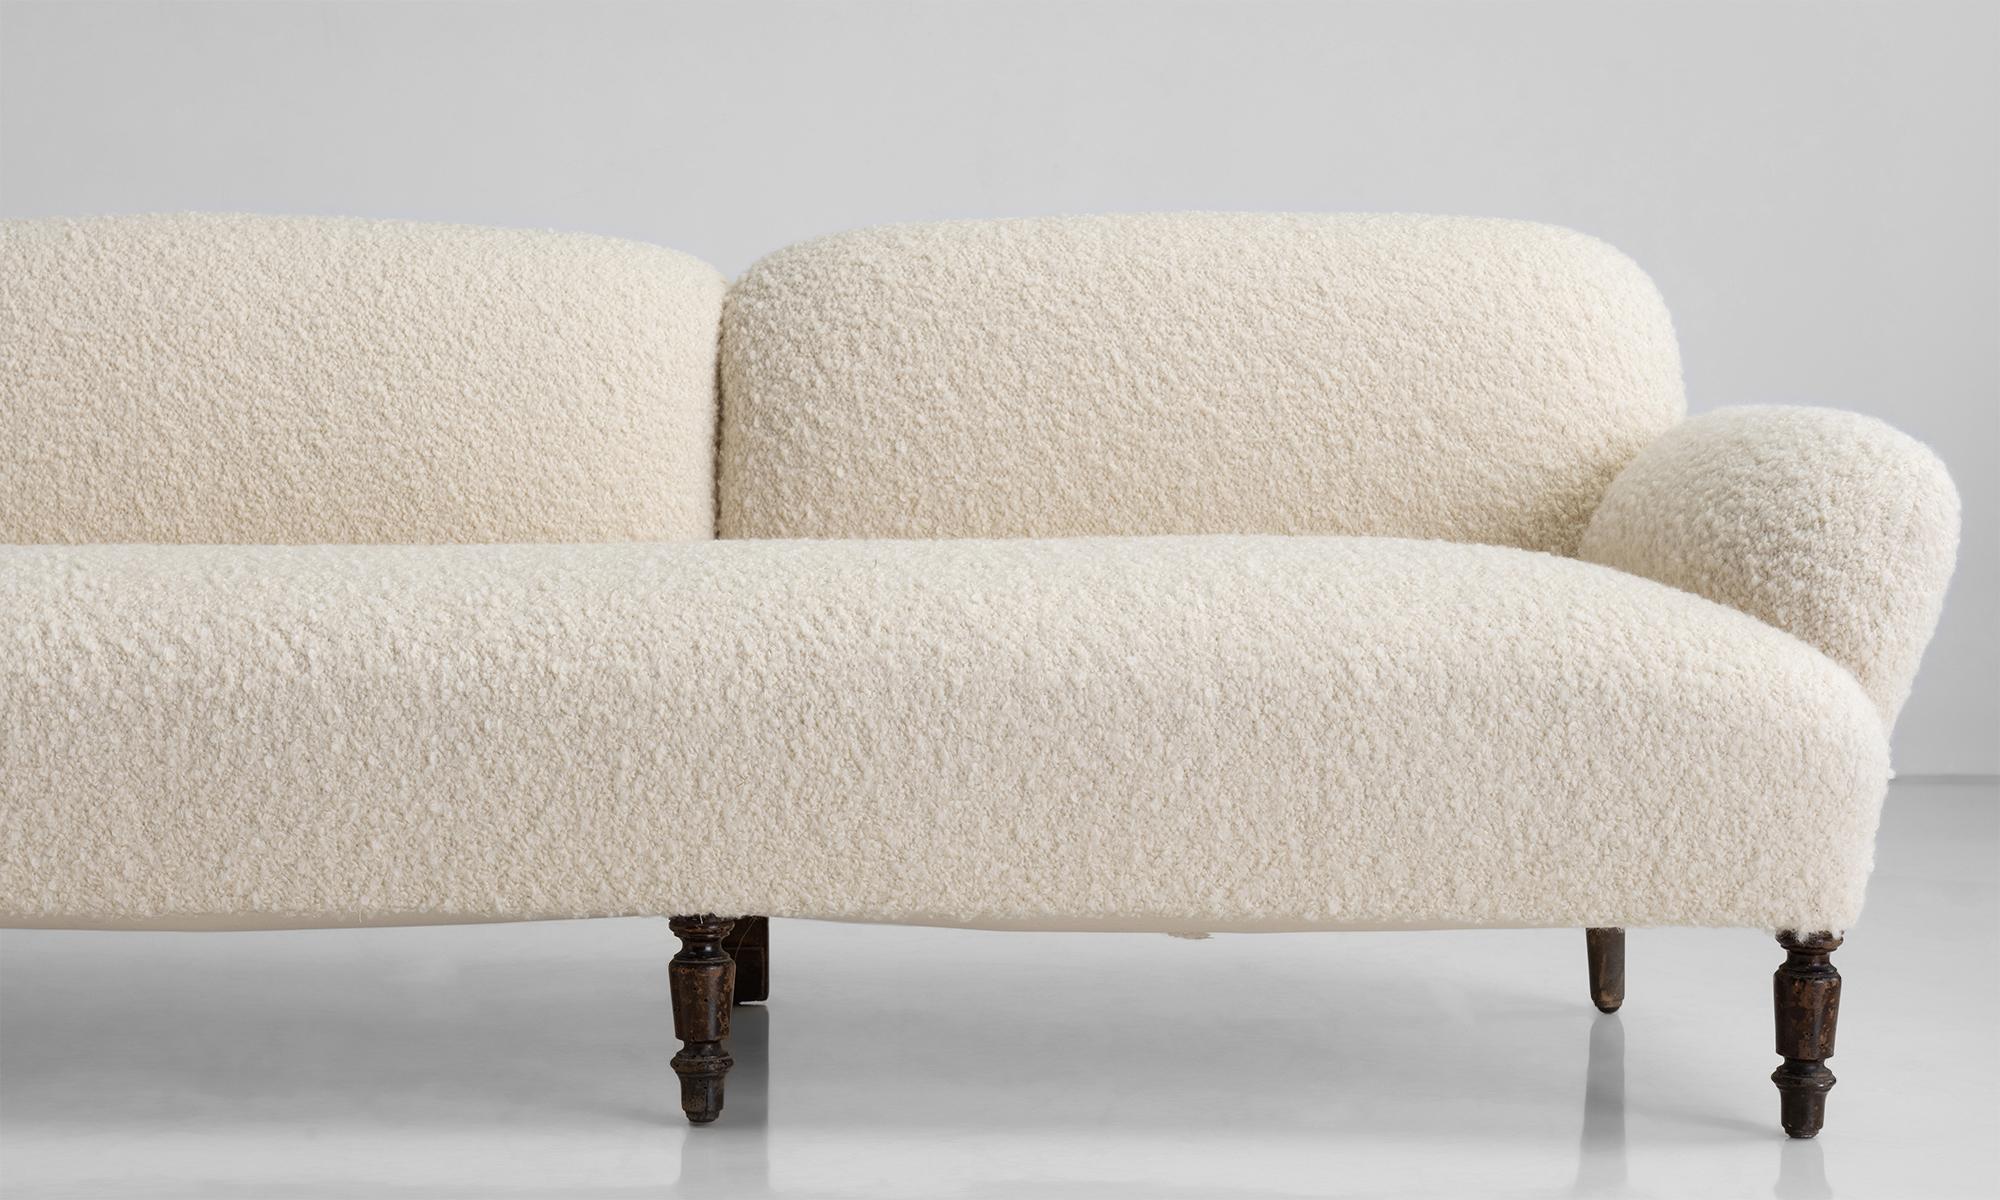 Massive Napoleon III sofa covered in Pierre Frey Ivory Boucle

France Circa 1870

Large scale sofa with beautifully curved backrest, newly upholstered in boucle blend by Pierre Frey.

Measures: 112